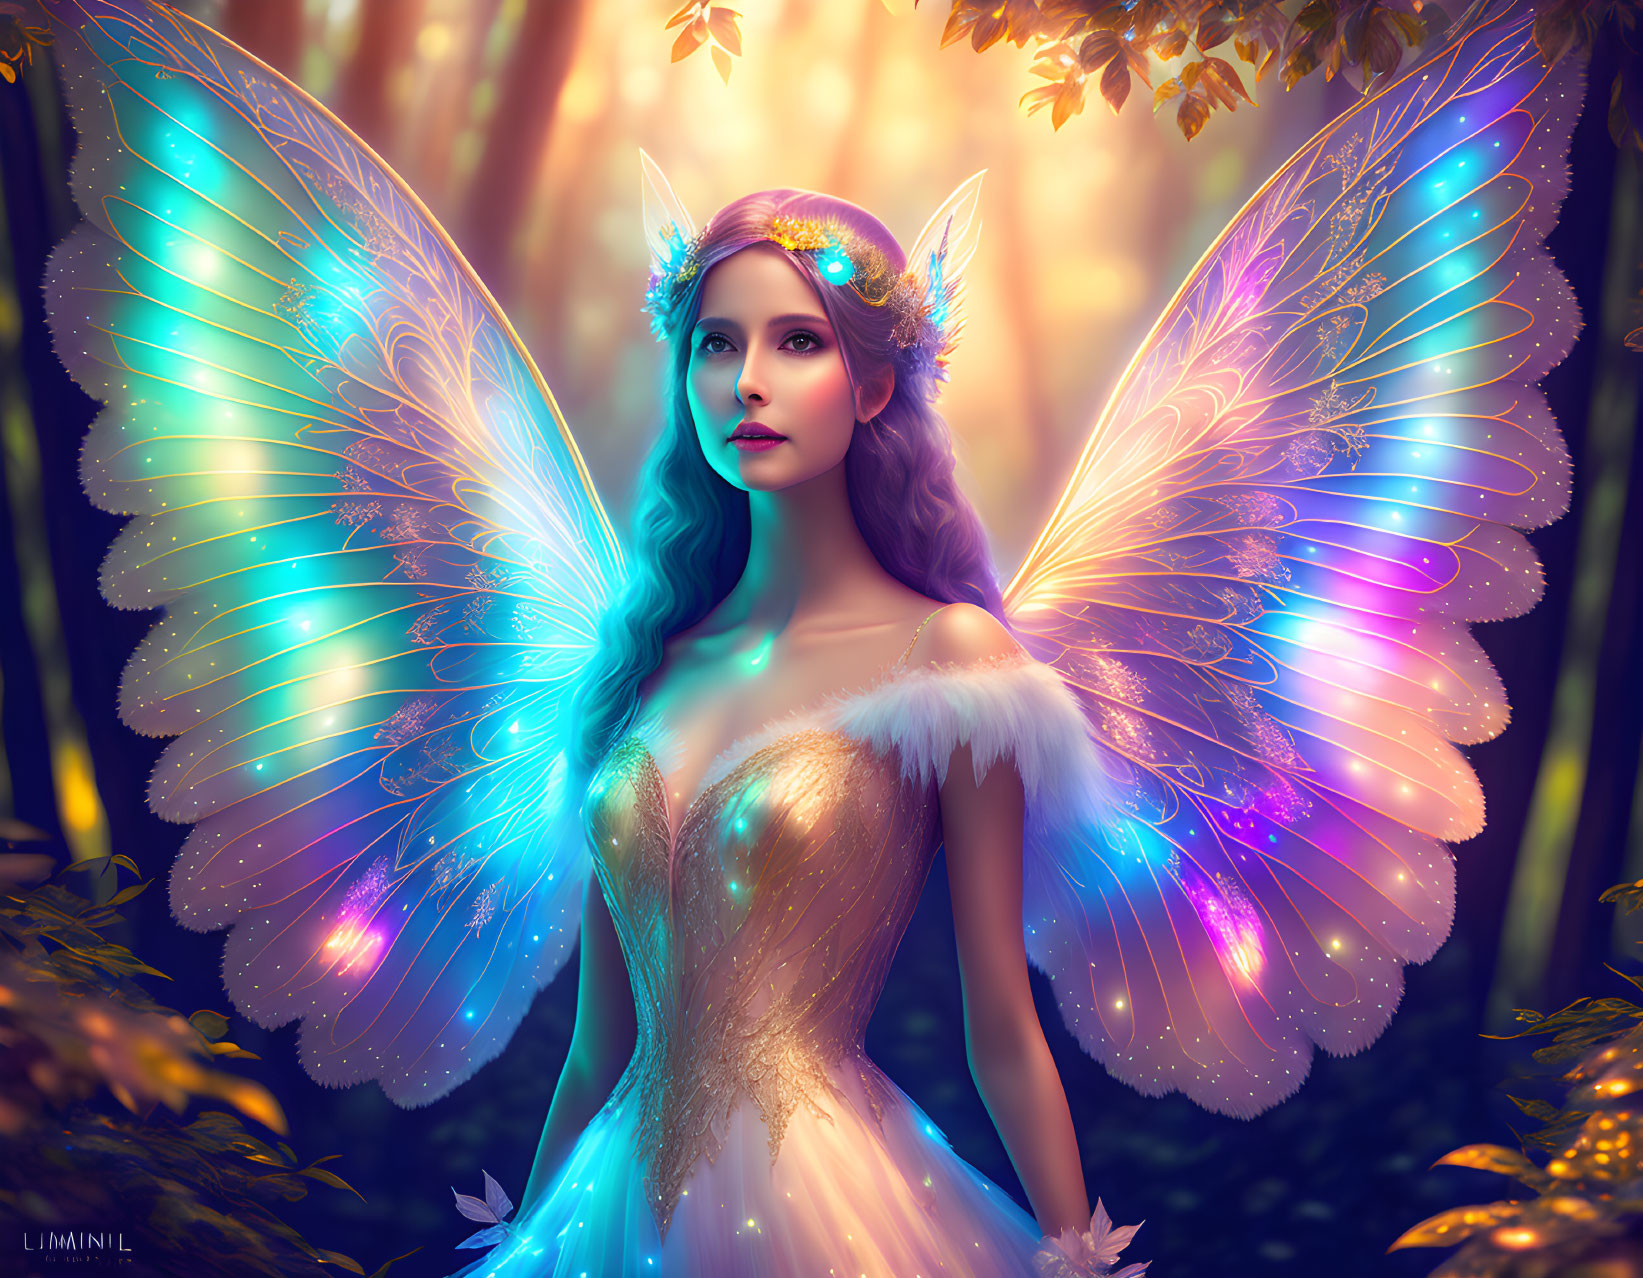 Fantastical female fairy with iridescent wings in enchanting forest